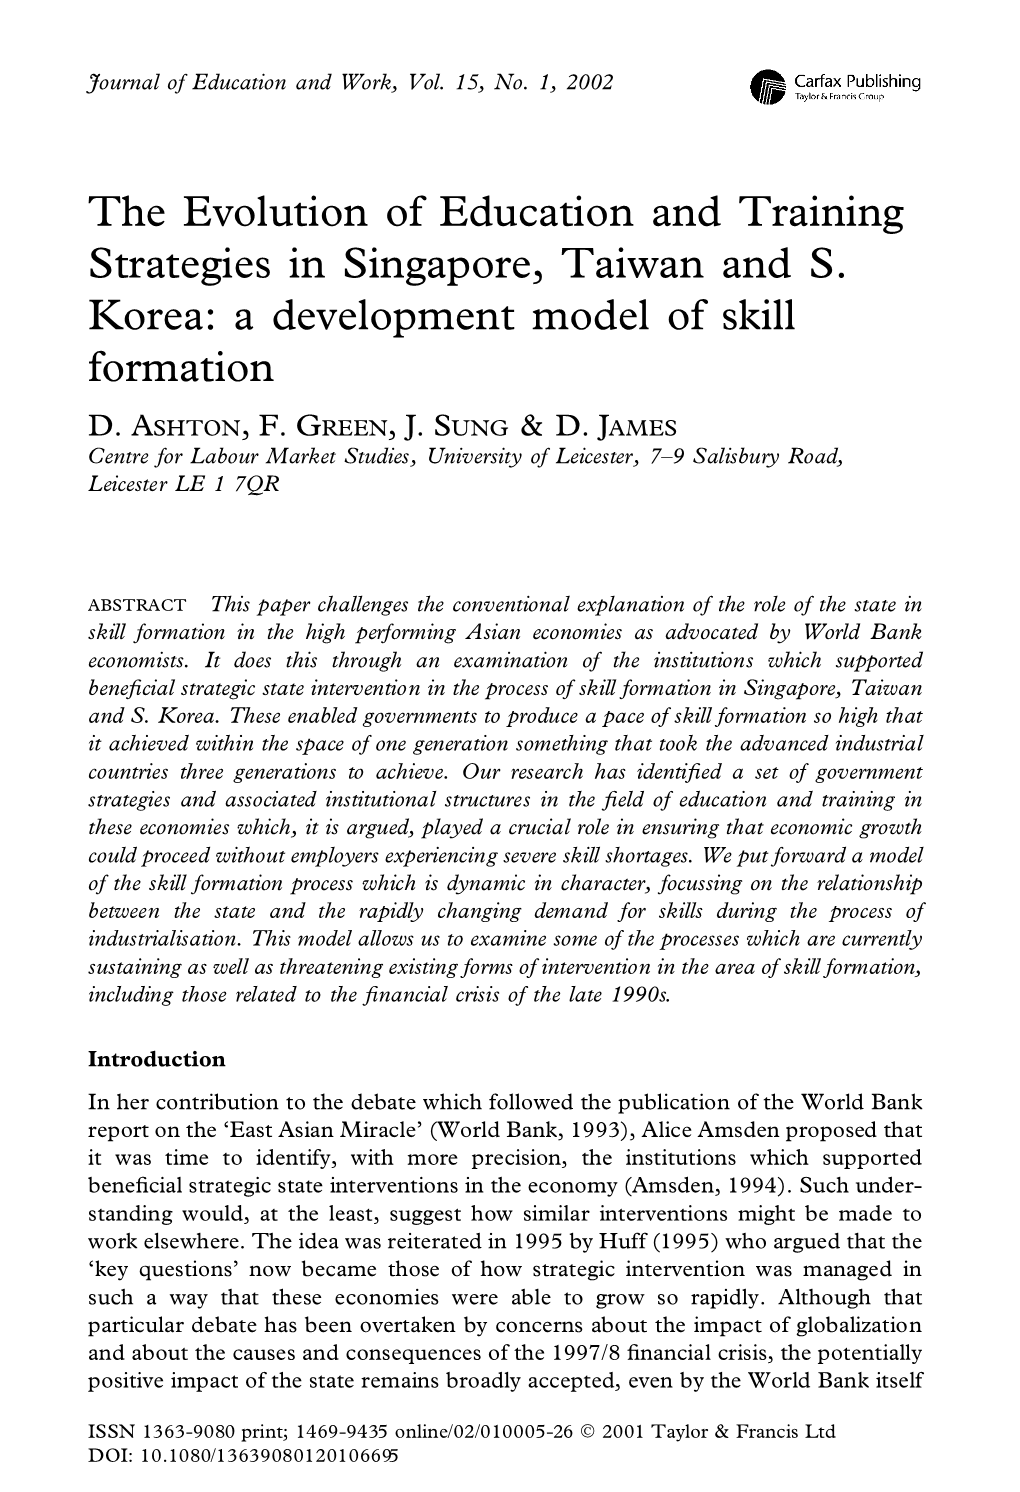 The Evolution of Education and Training Strategies in Singapore, Taiwan and S